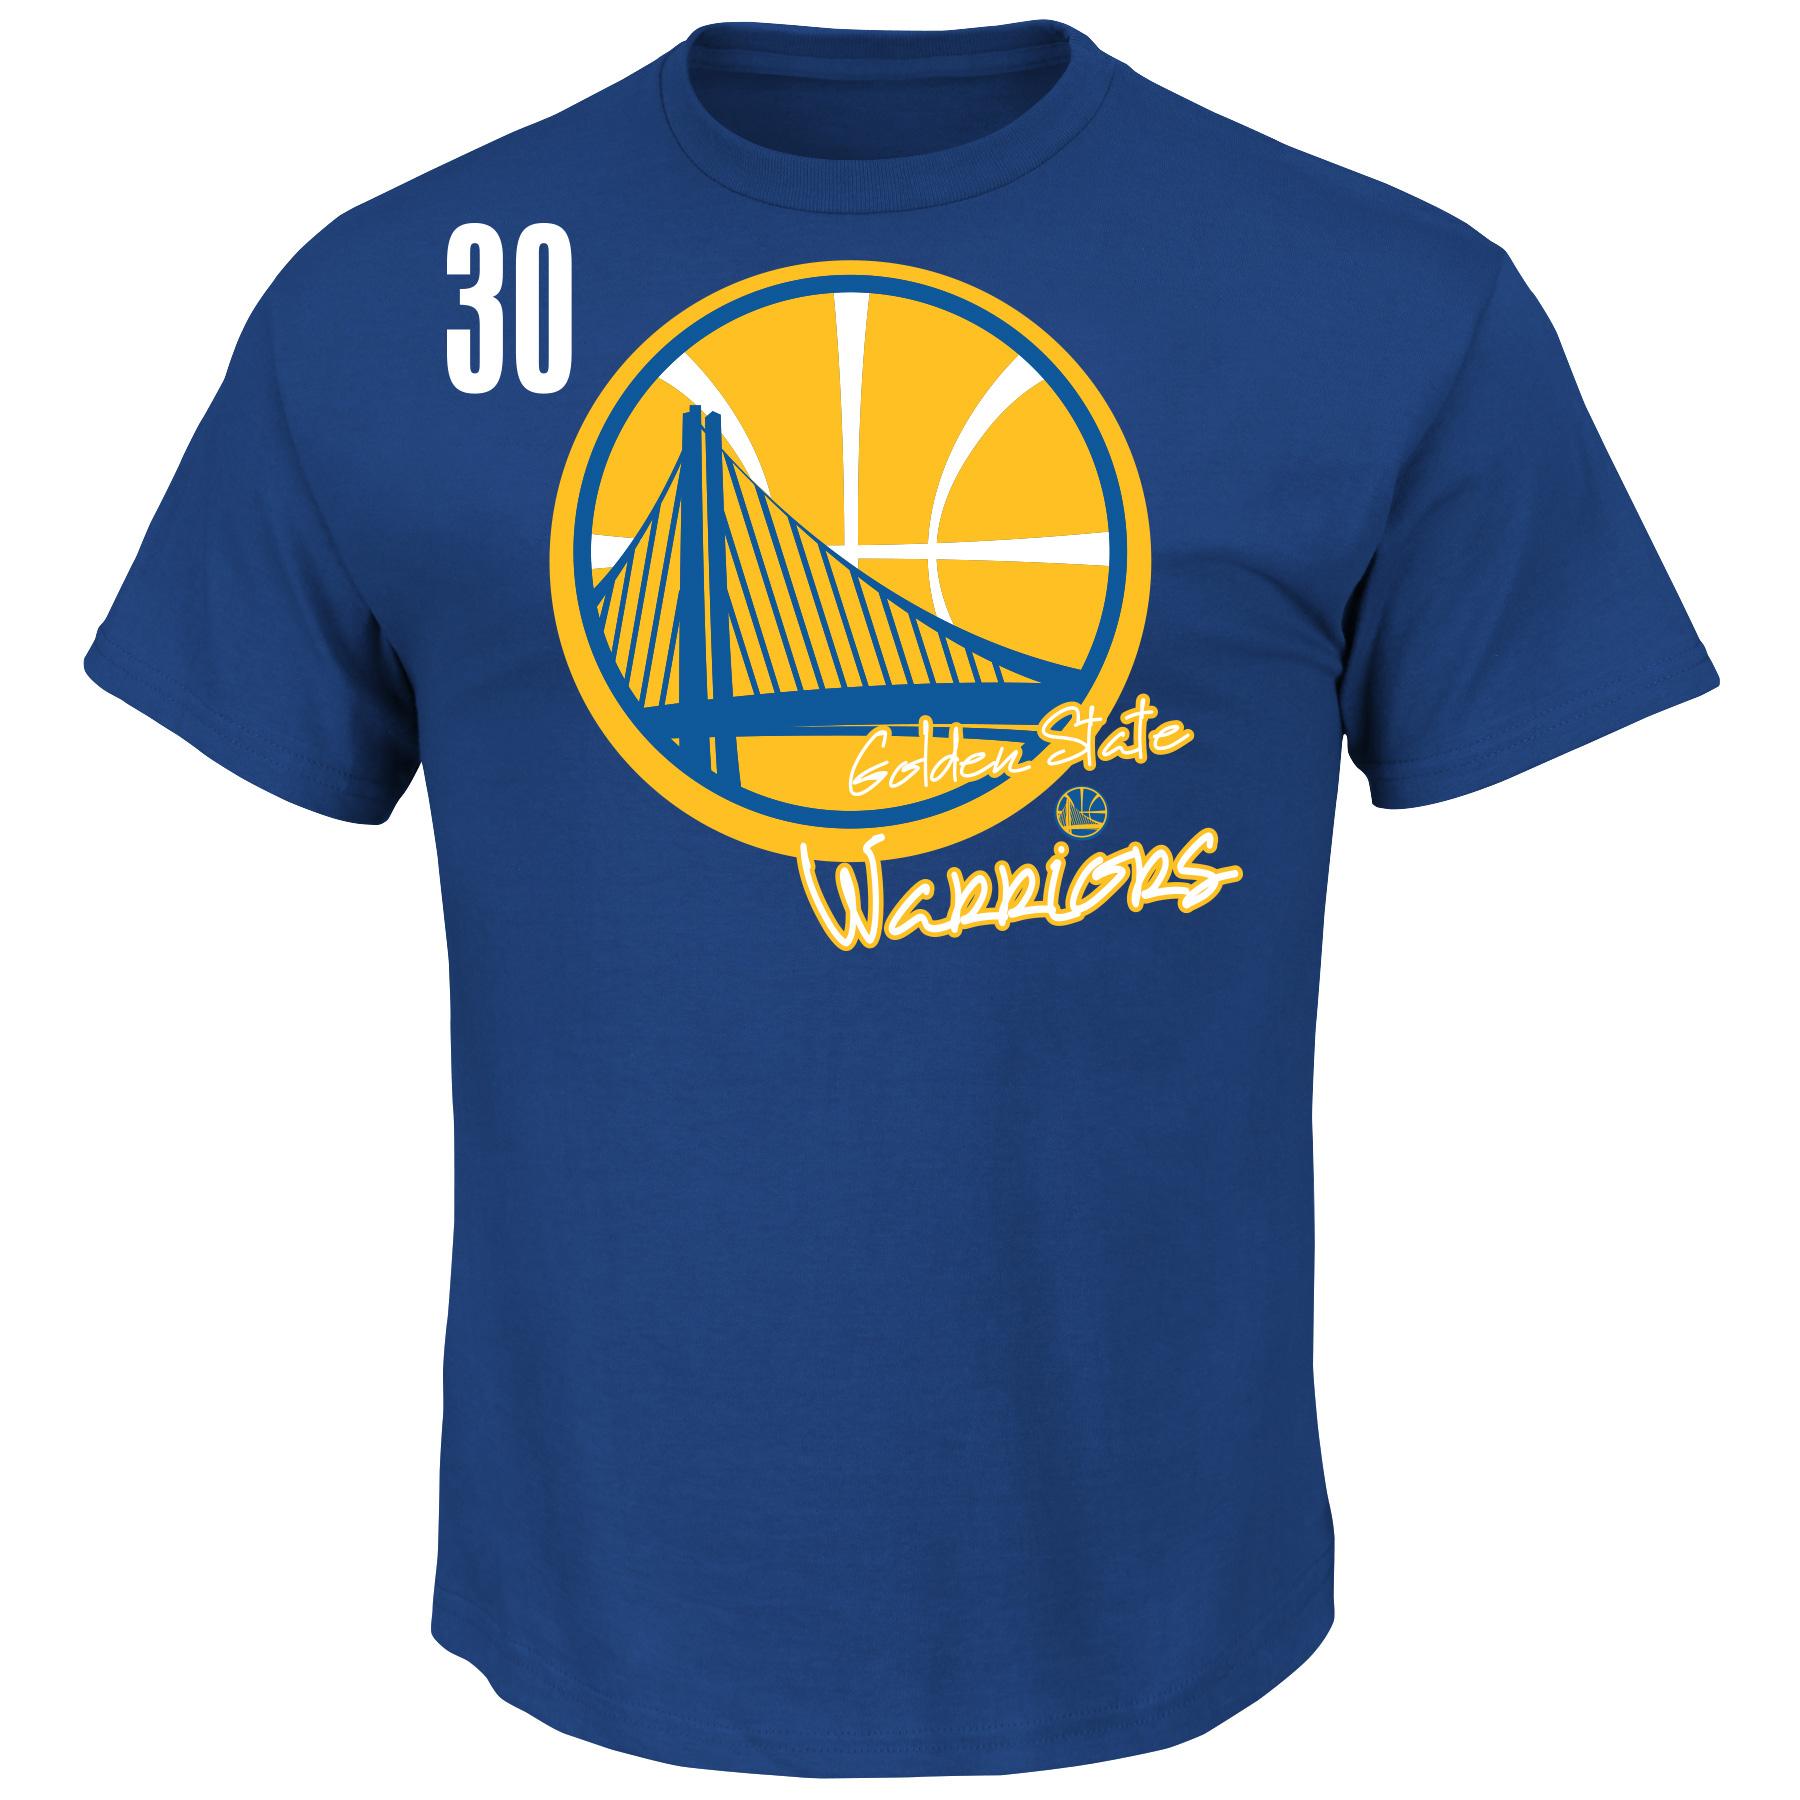 NBA(CANONICAL) Stephen Curry Men's Graphic T-Shirt - Golden State Warriors